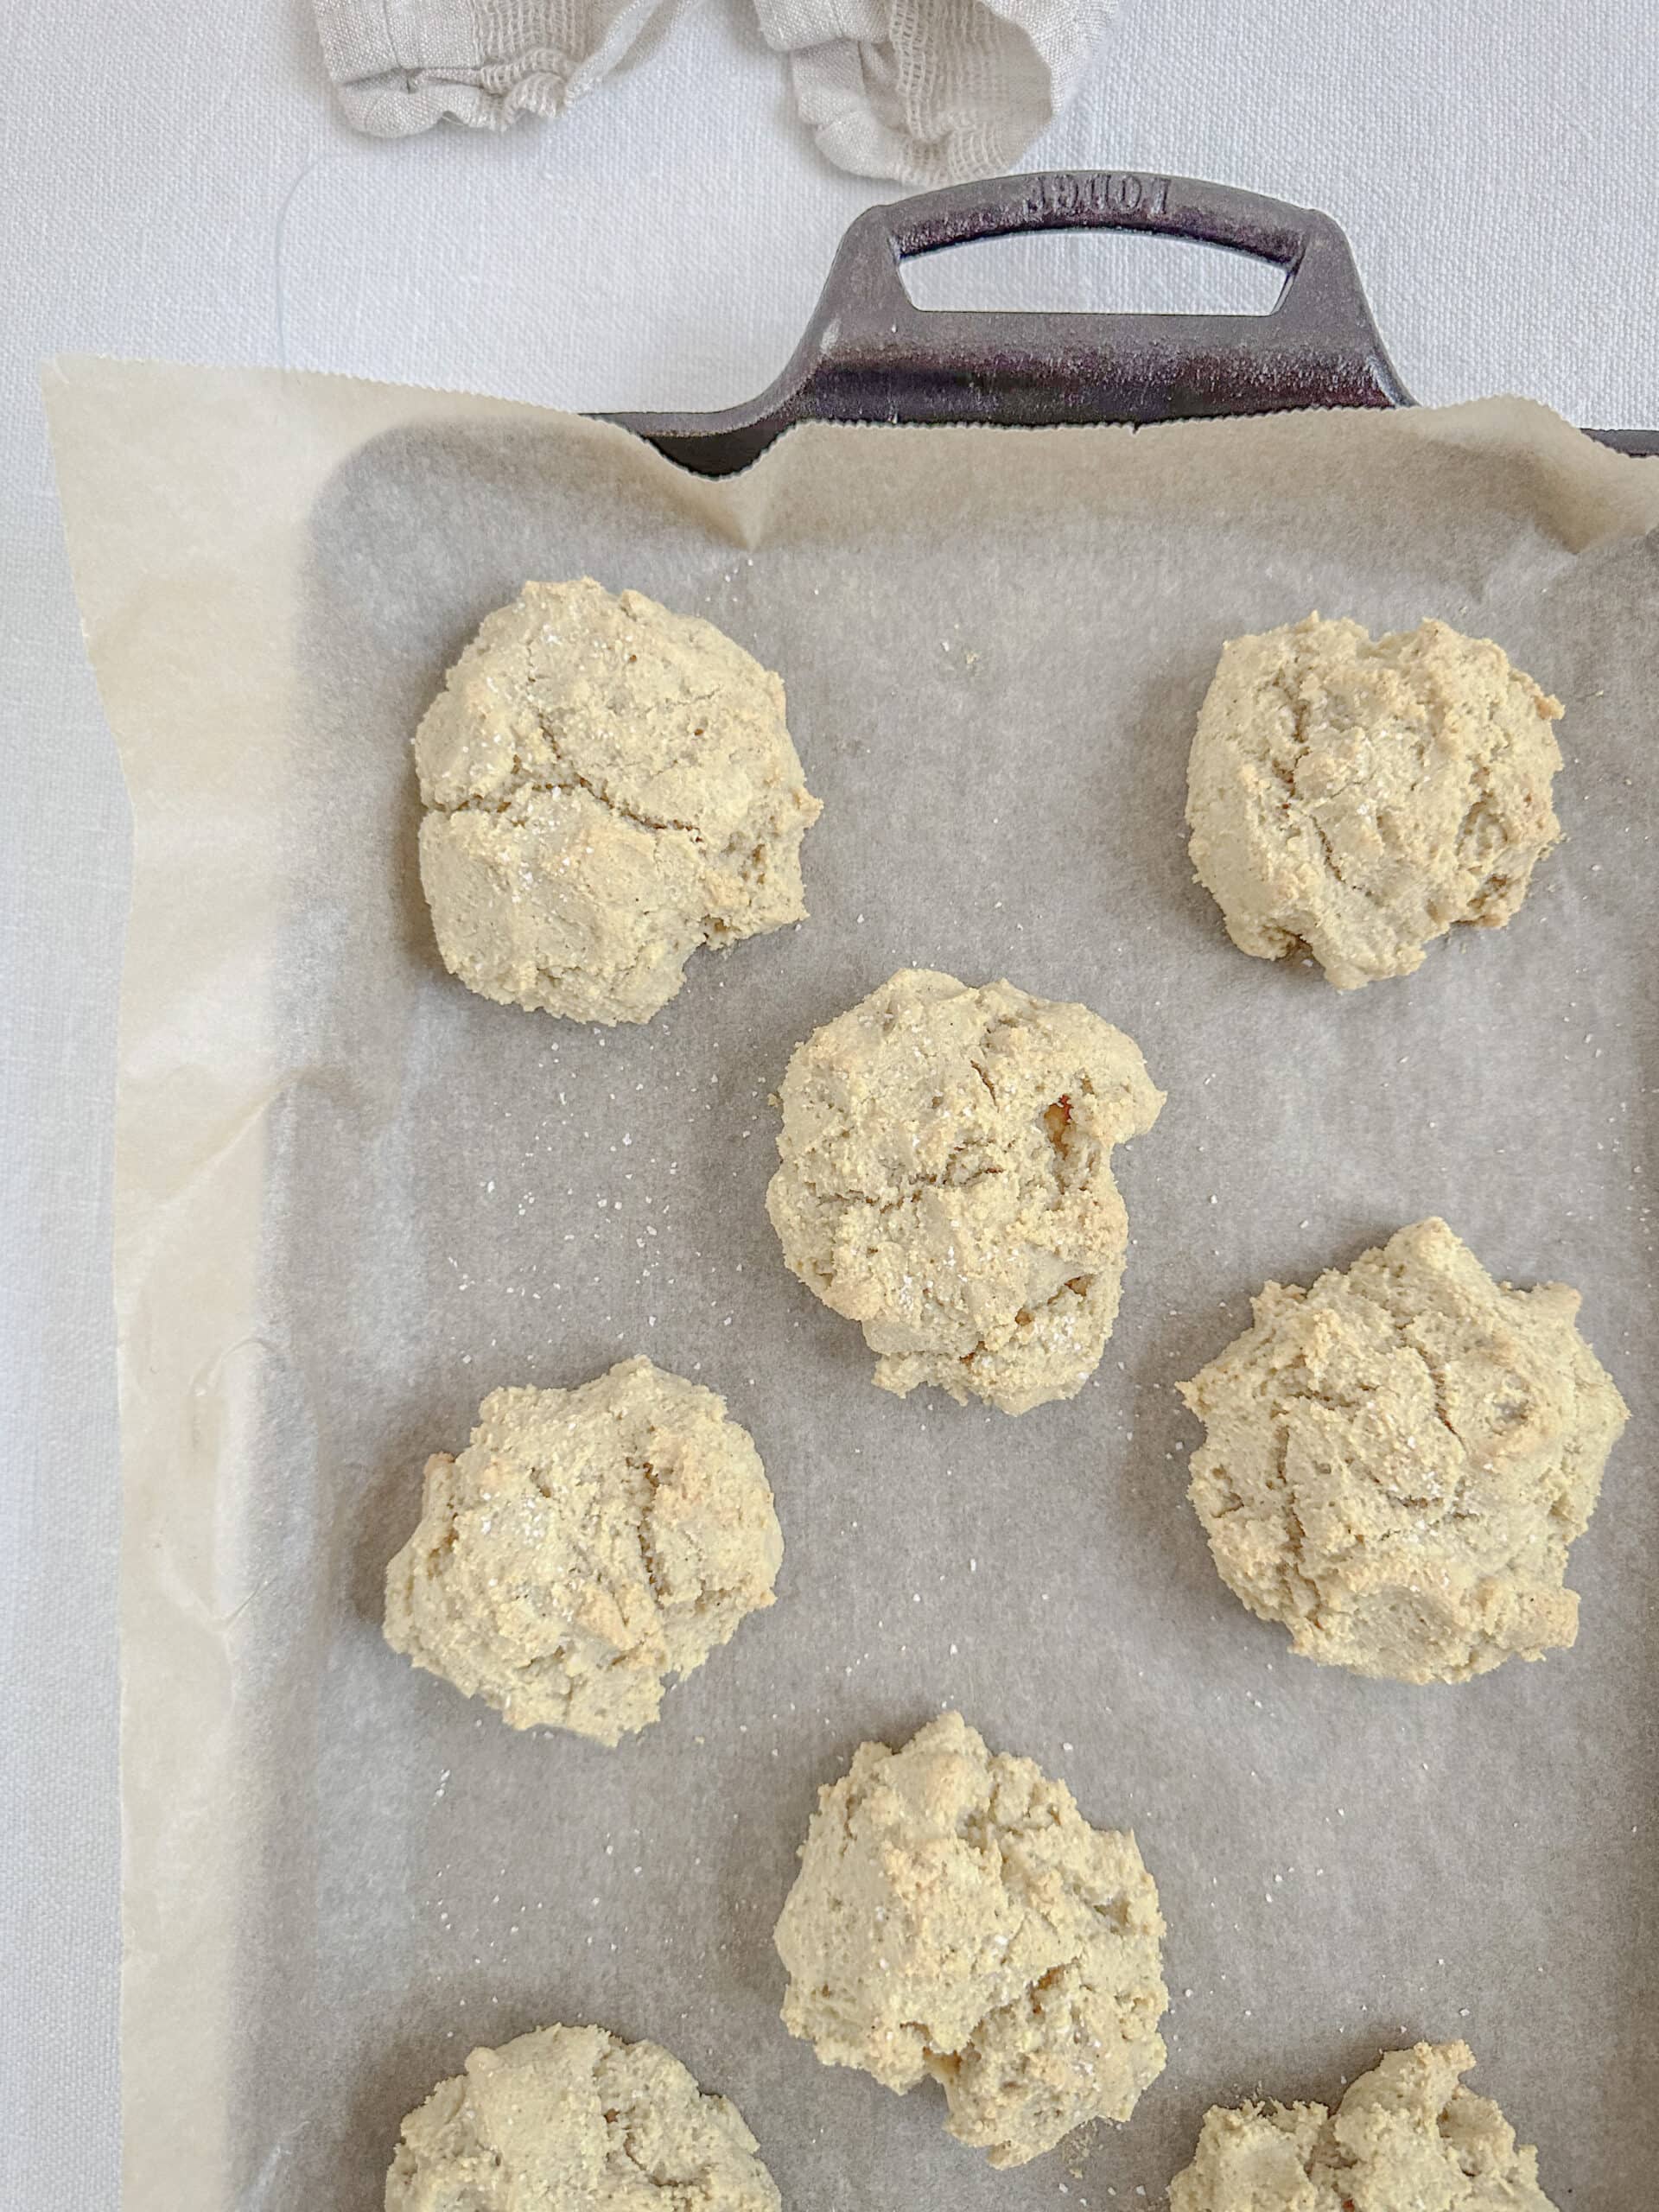 almond flour biscuits on a rimmed baking sheet